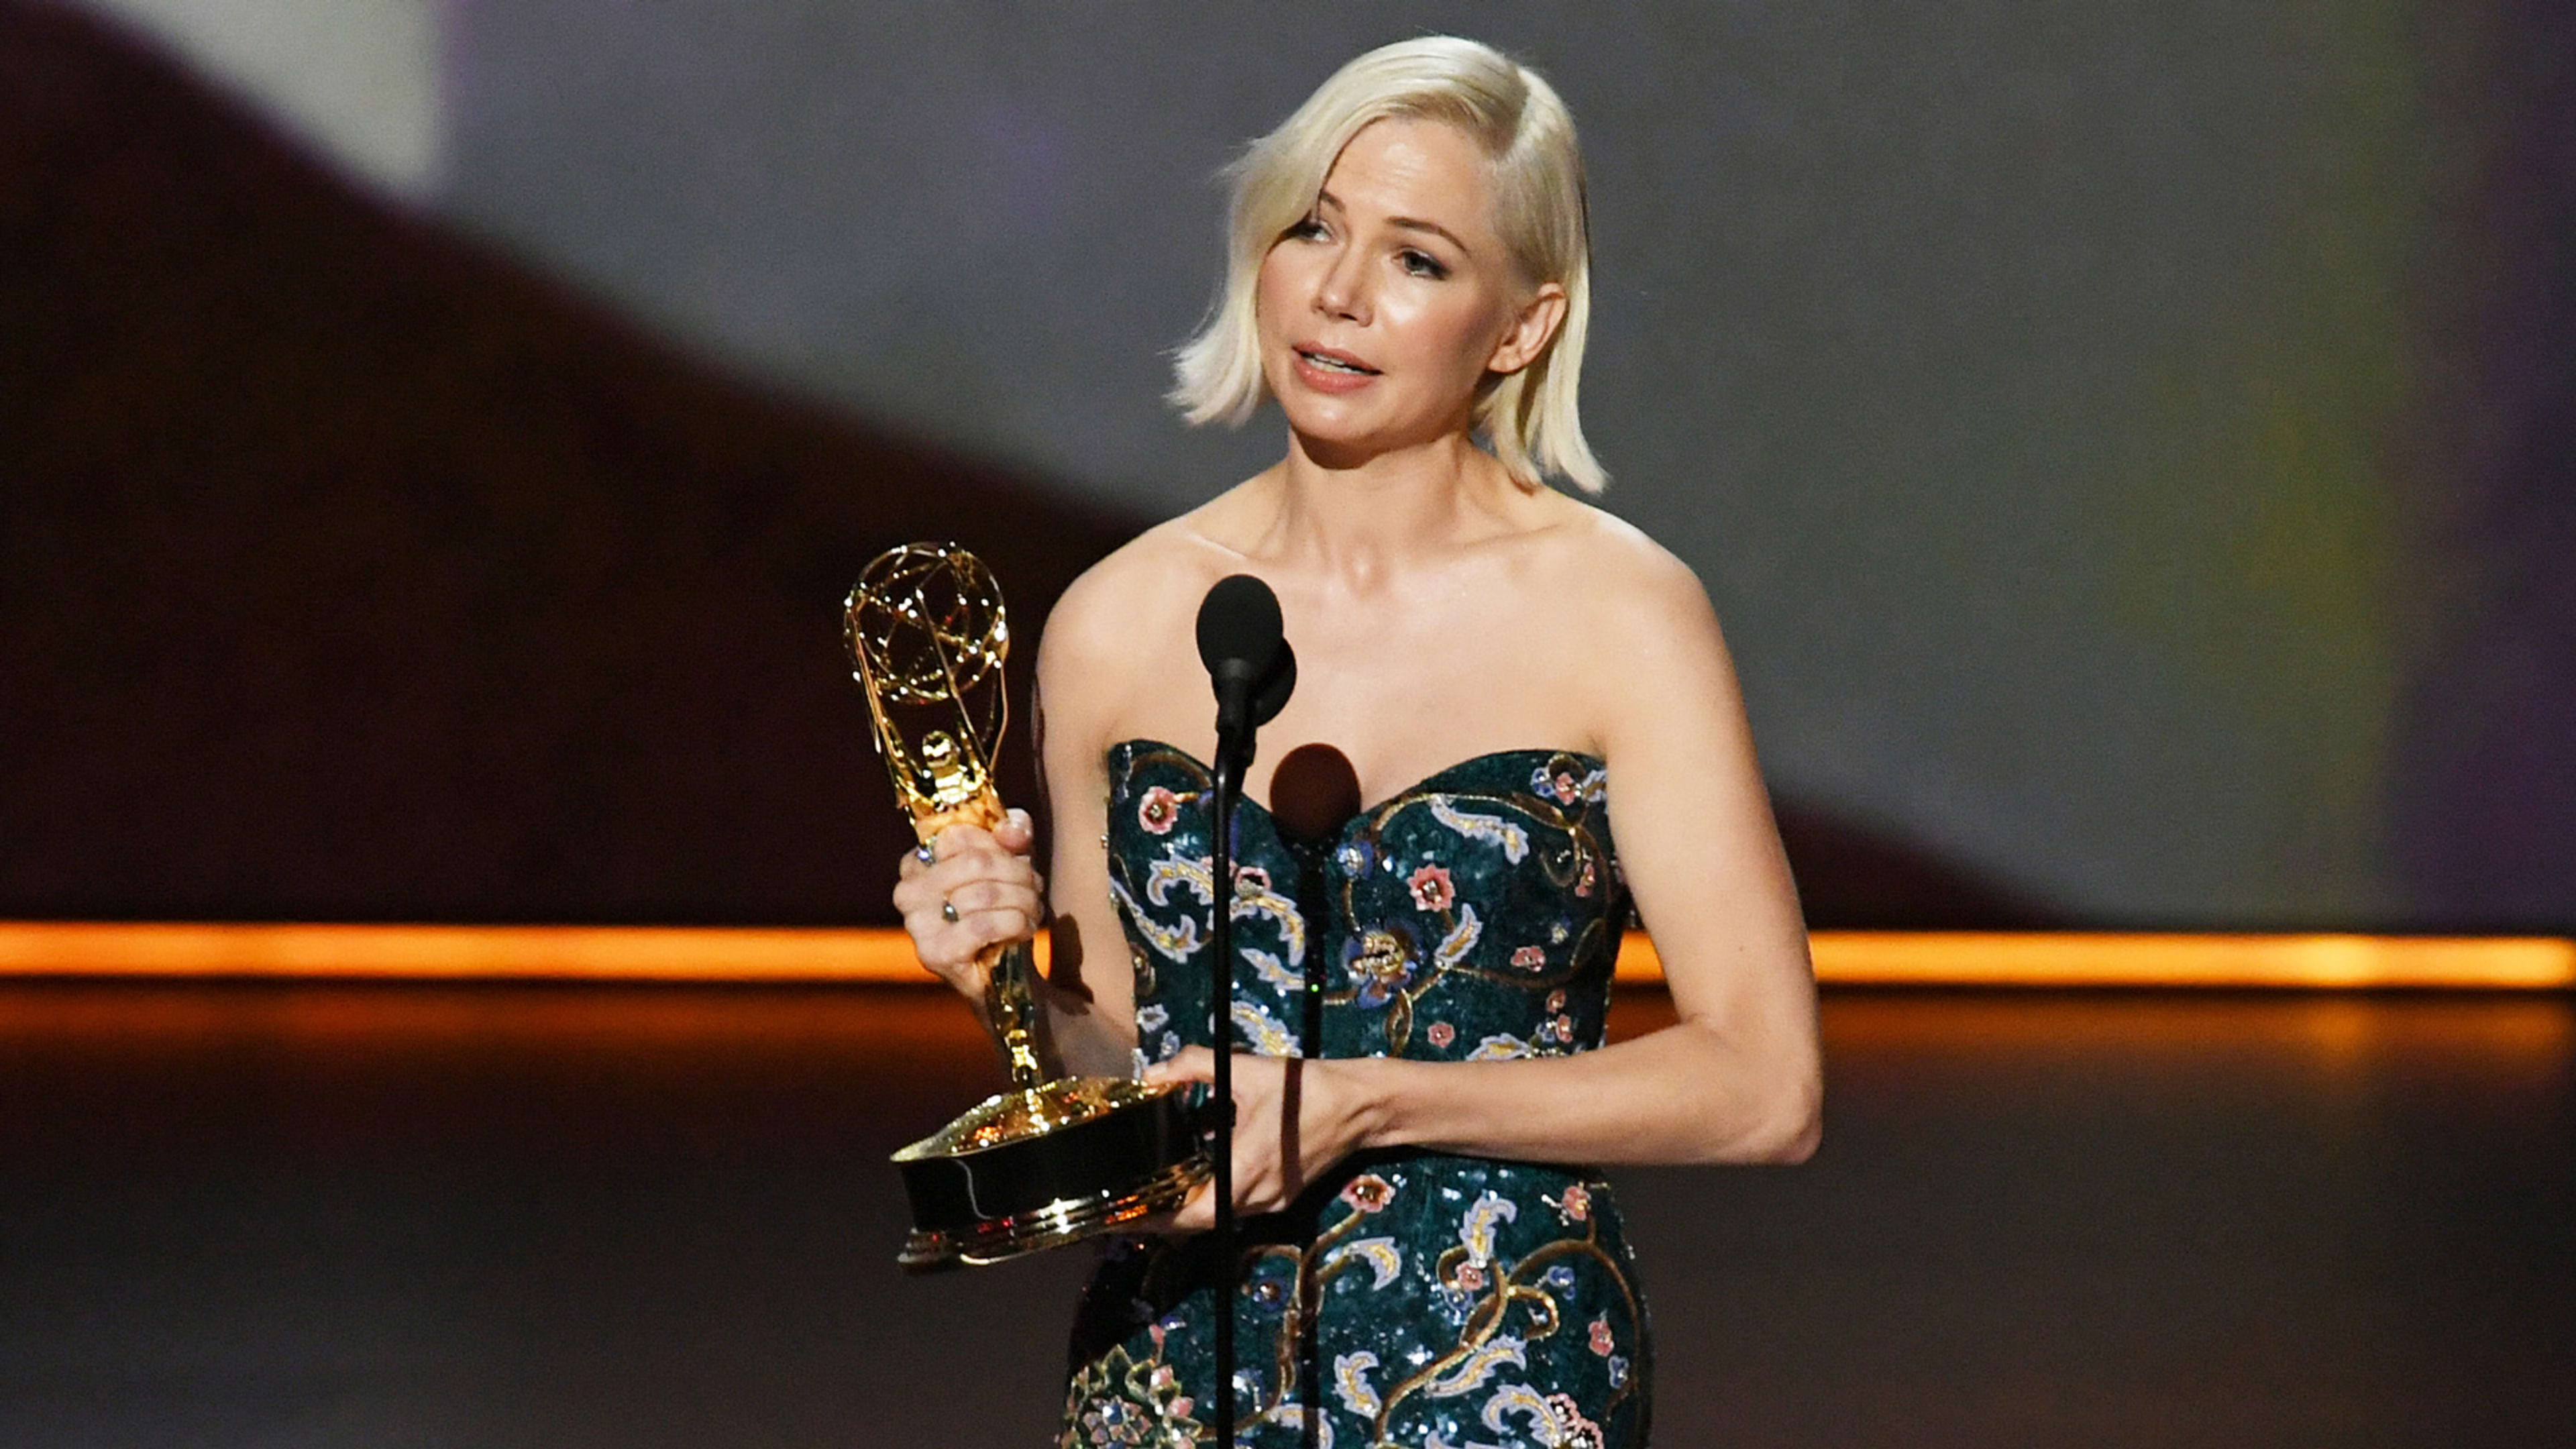 Michelle Williams’s Emmys speech calls out workplace inequality for women of color